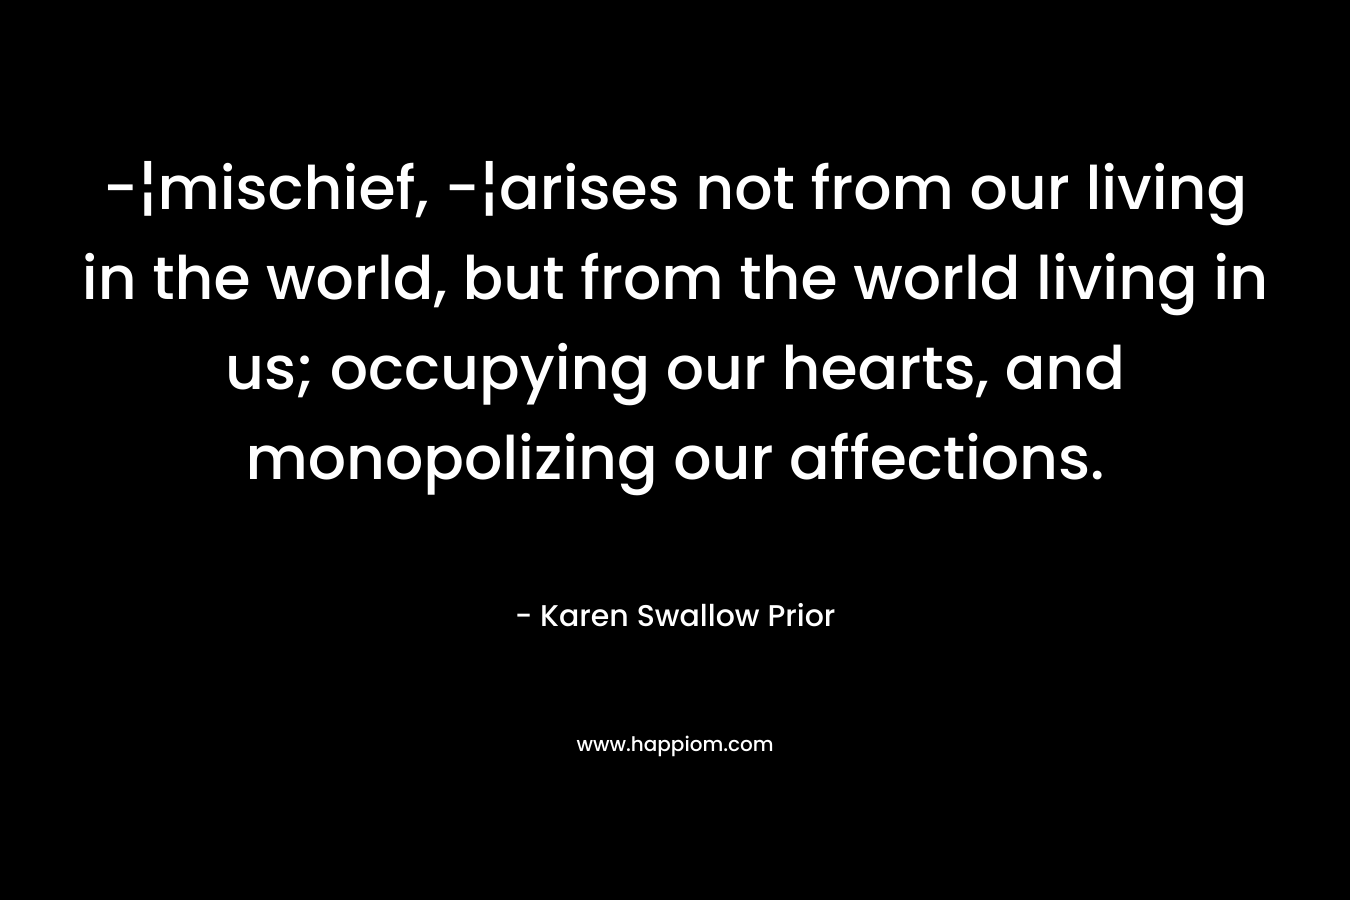 -¦mischief, -¦arises not from our living in the world, but from the world living in us; occupying our hearts, and monopolizing our affections. – Karen Swallow Prior